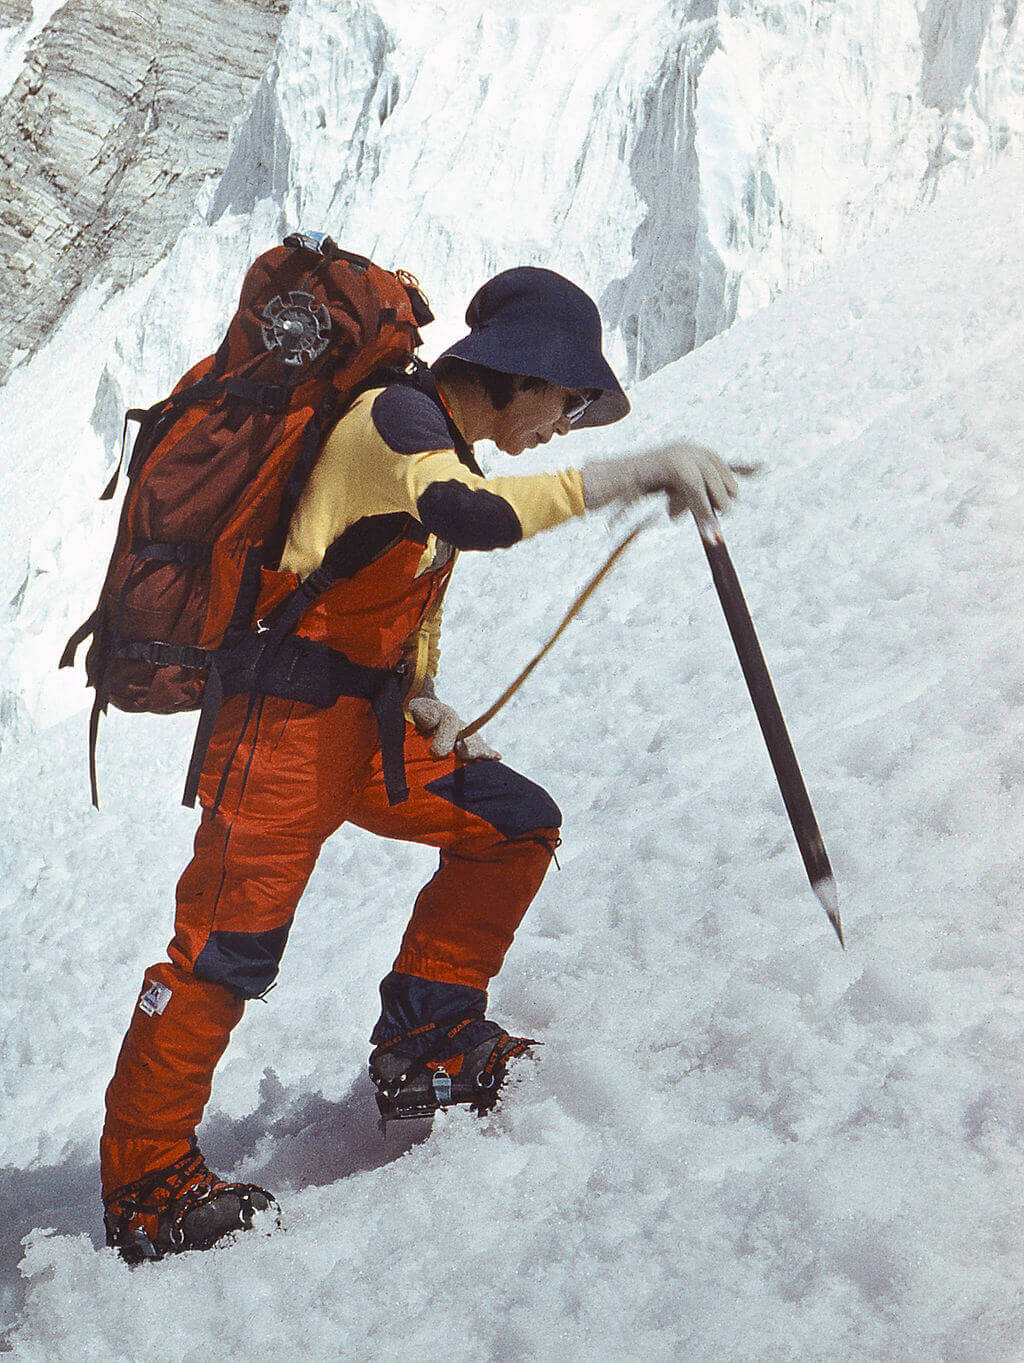 Junko Tabei female mountaineer in the snow